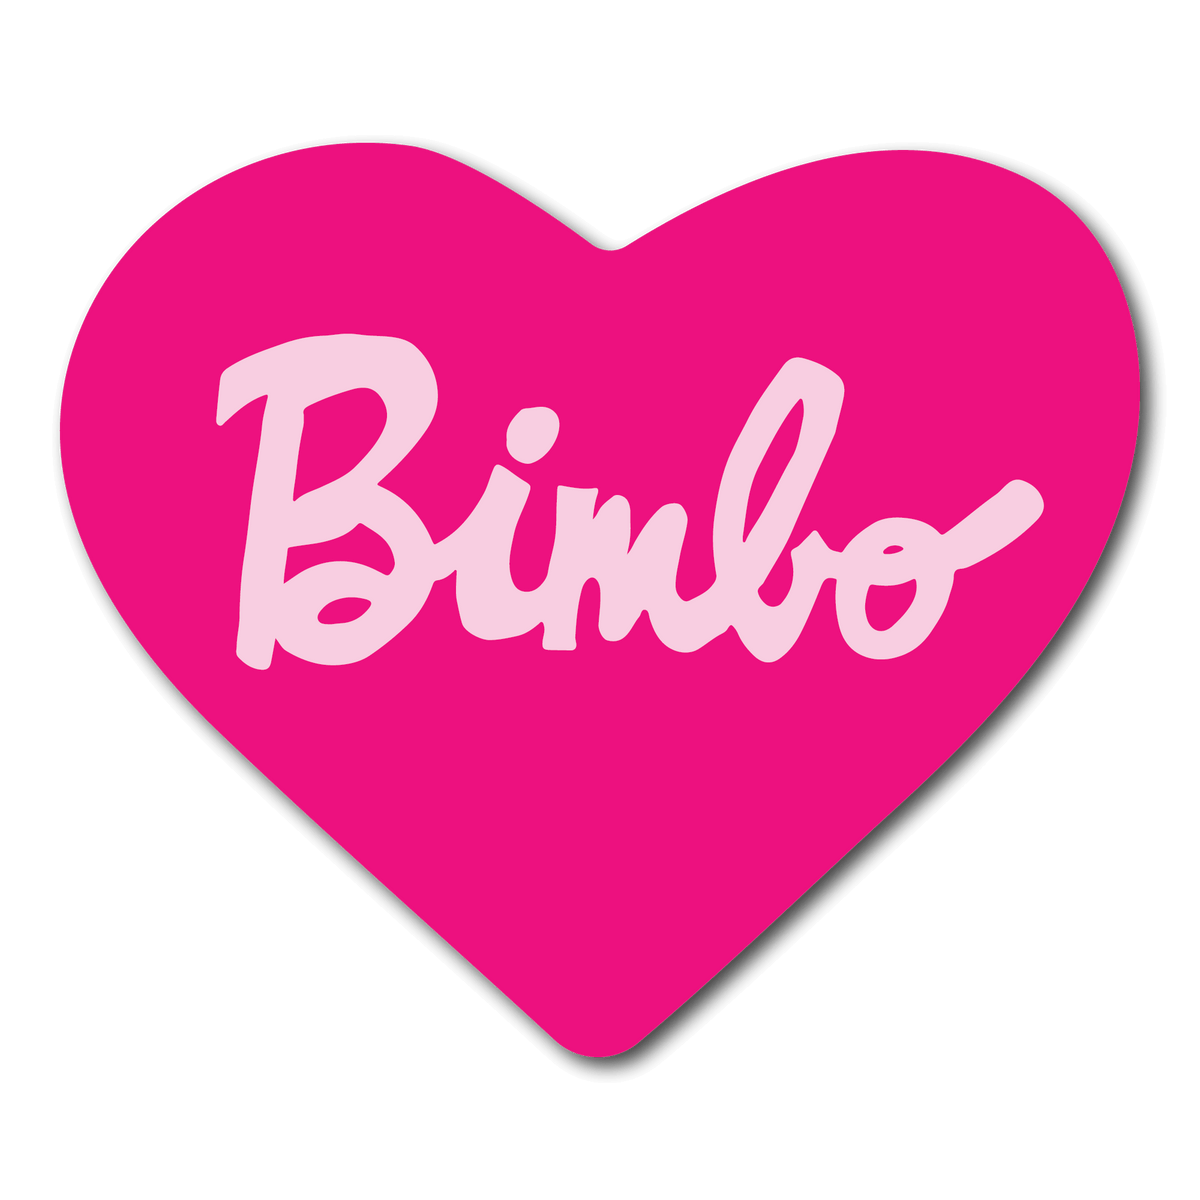 Small Pink Heart Sticker that says Bimbo for phone case or water bottle